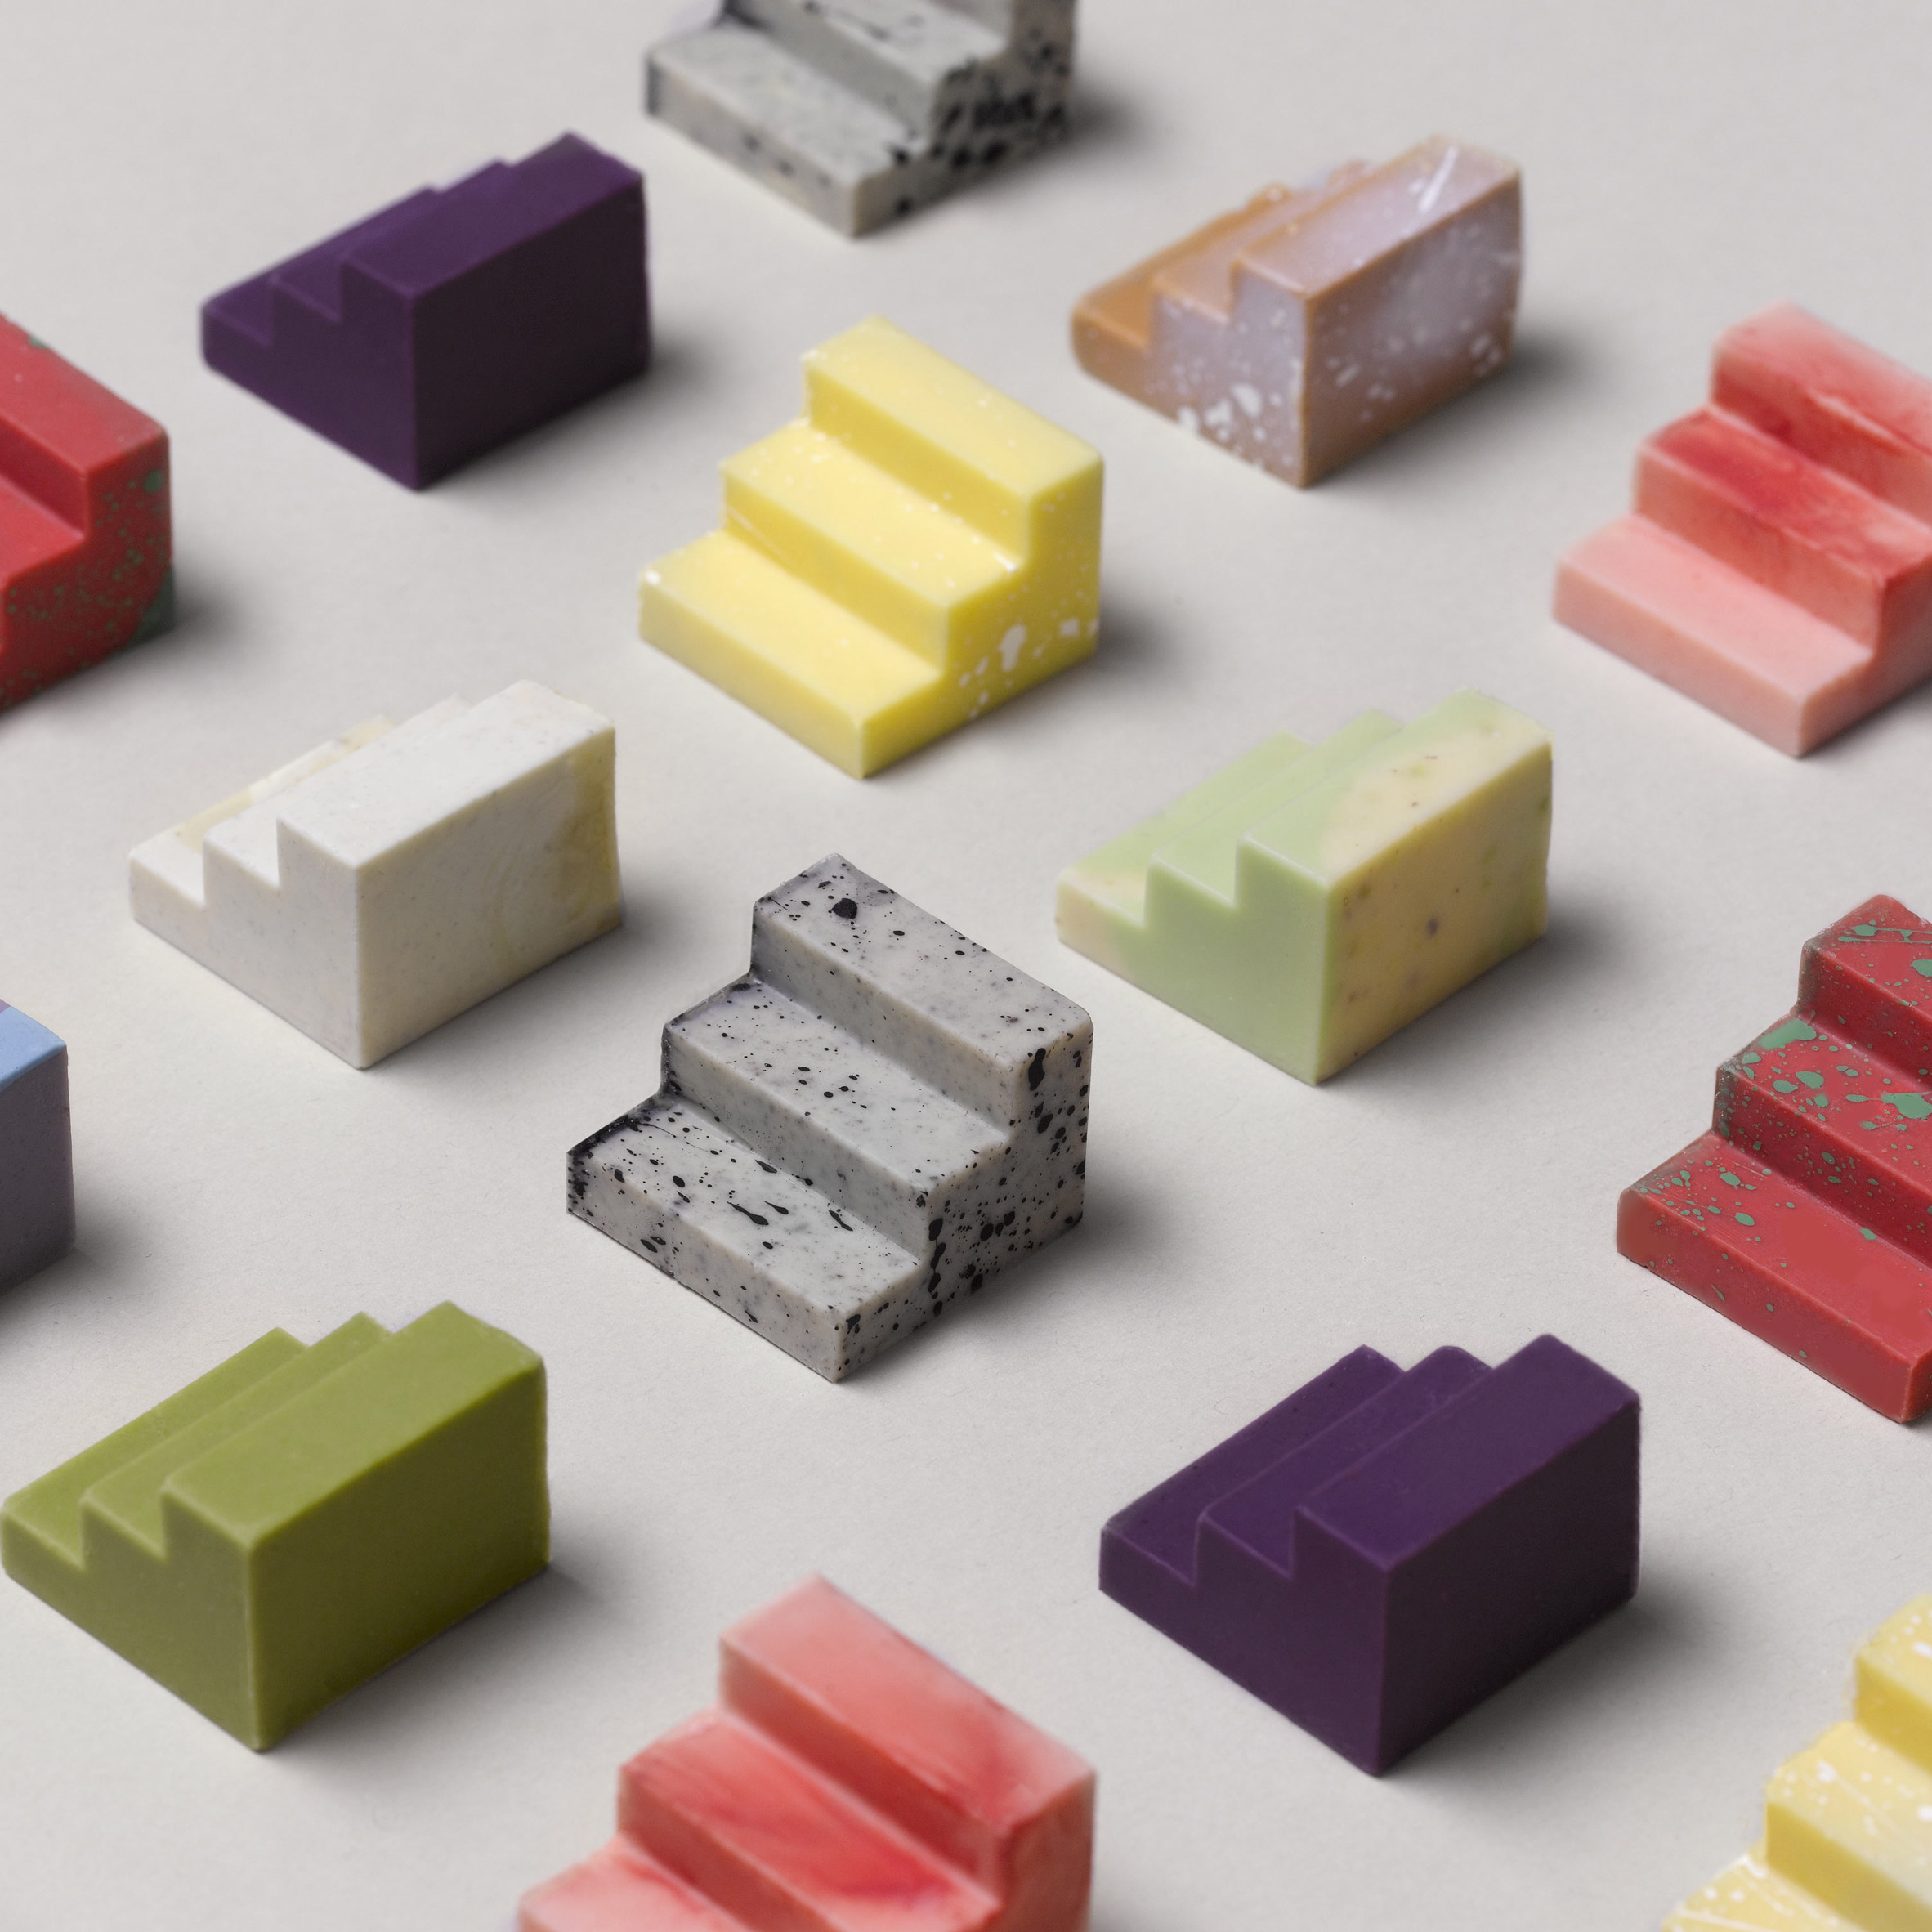 Universal Favourite produces colourful chocolates from 3D-printed